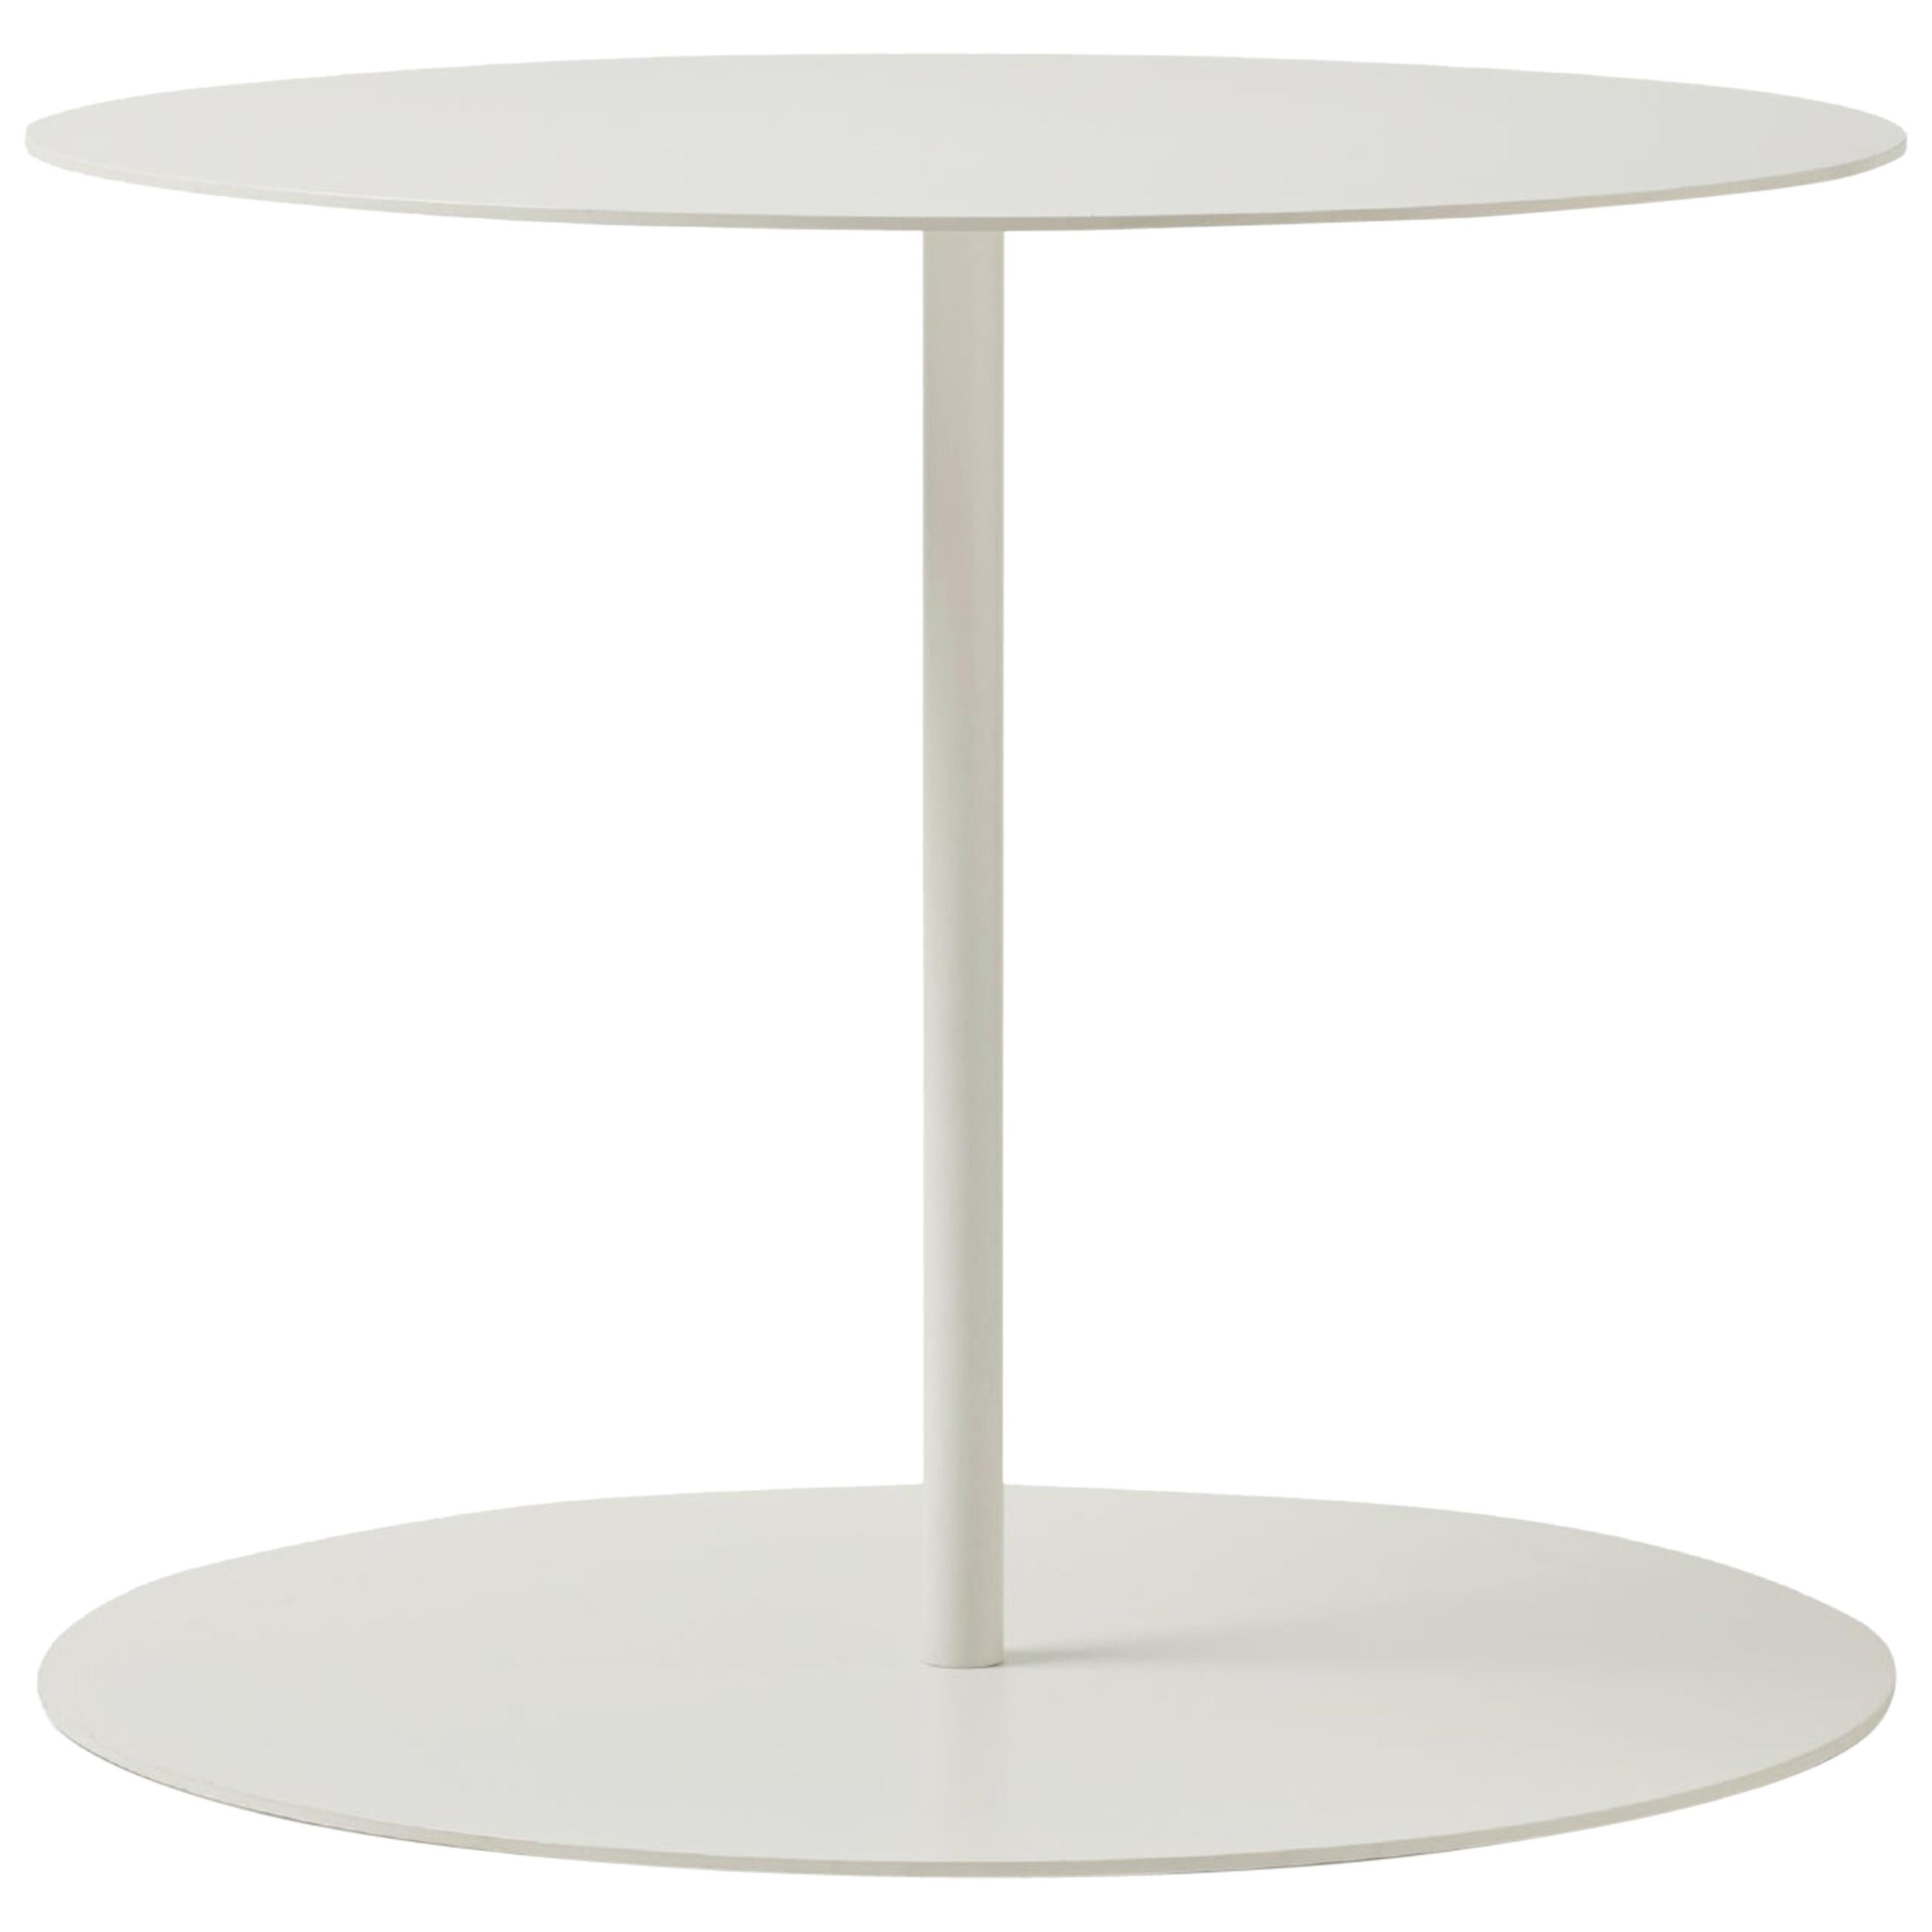 Giulio Cappellini Gong Table in White Laser-Cut Sheet Metal and Matte Top